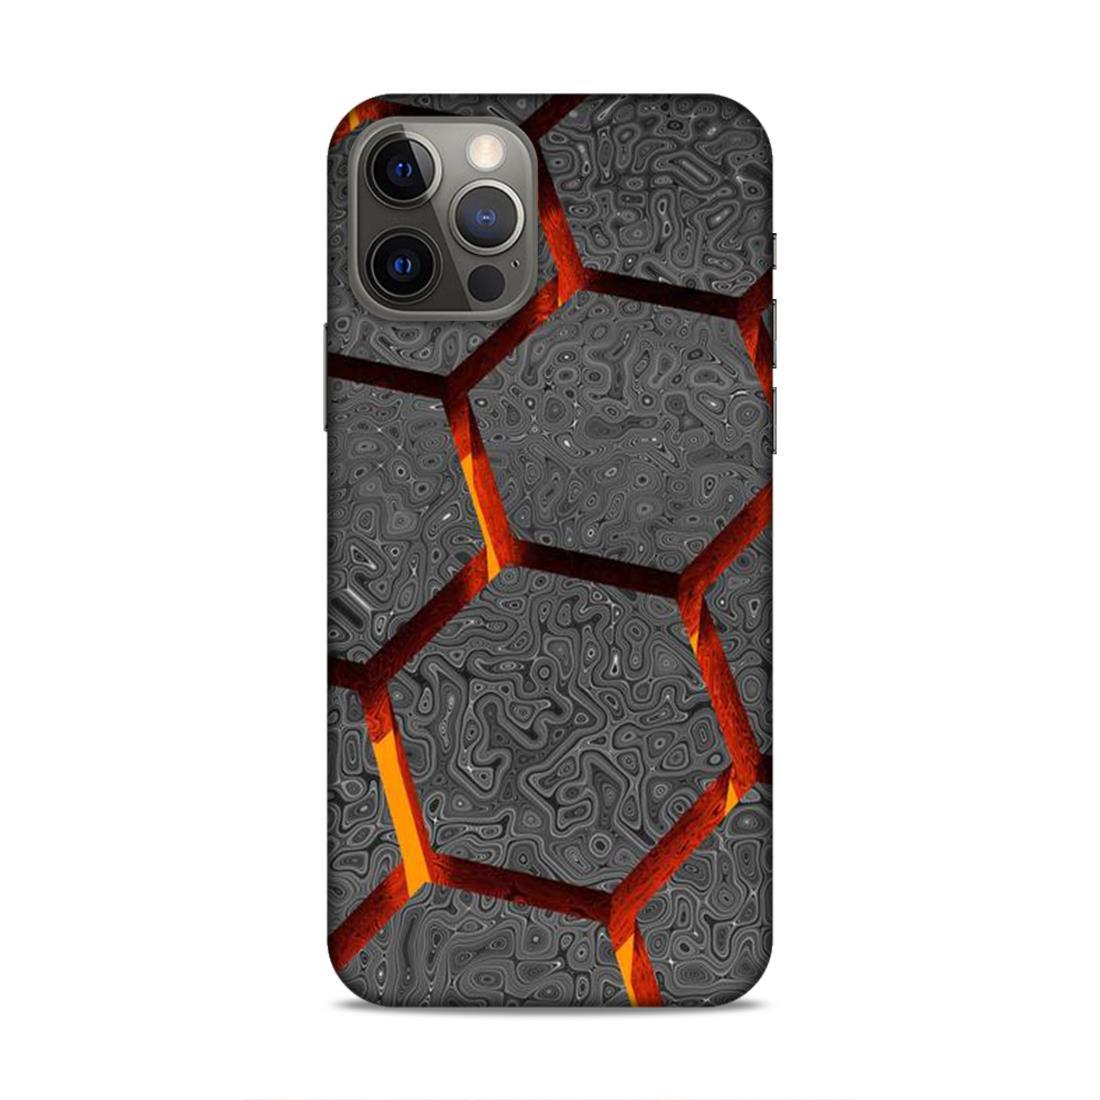 Hexagon Pattern iPhone 12 Pro Phone Case Cover